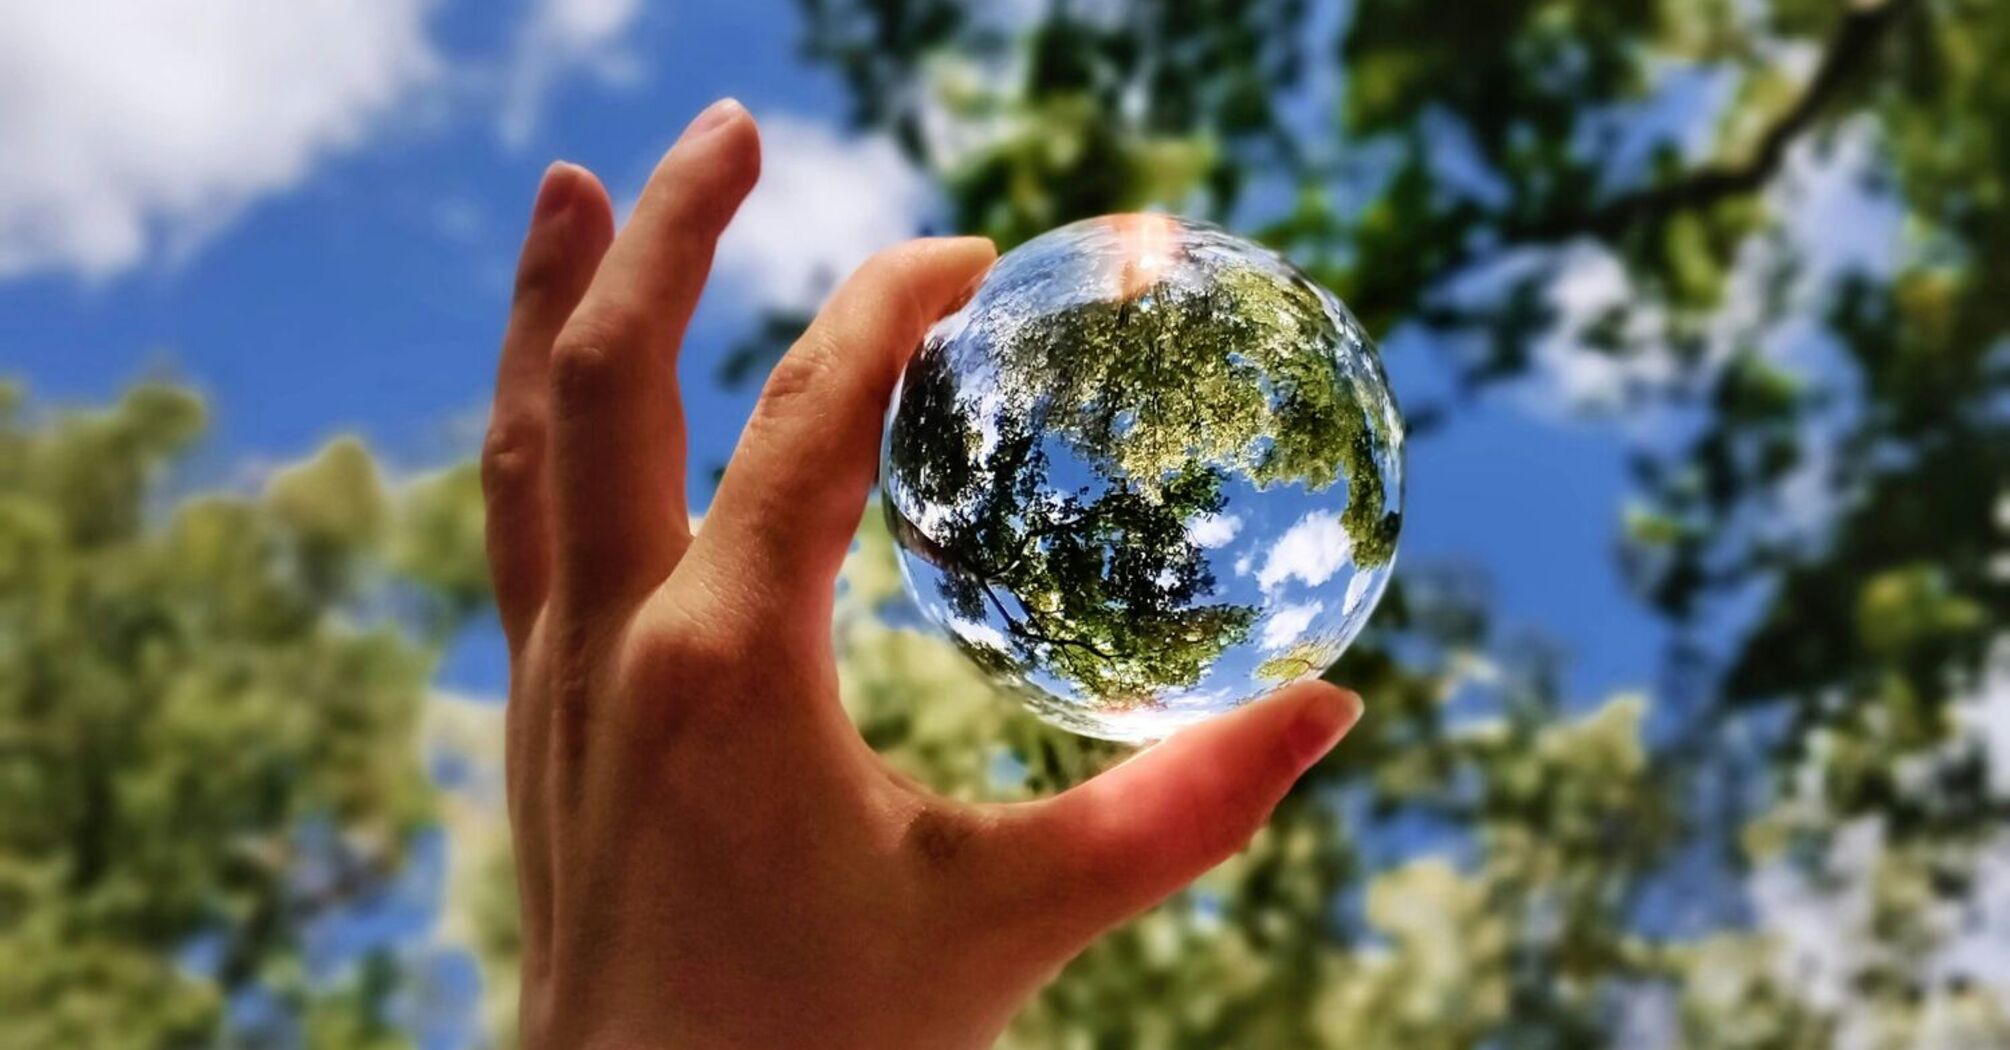 A hand holding a crystal ball against a blue sky, reflecting the green trees above 